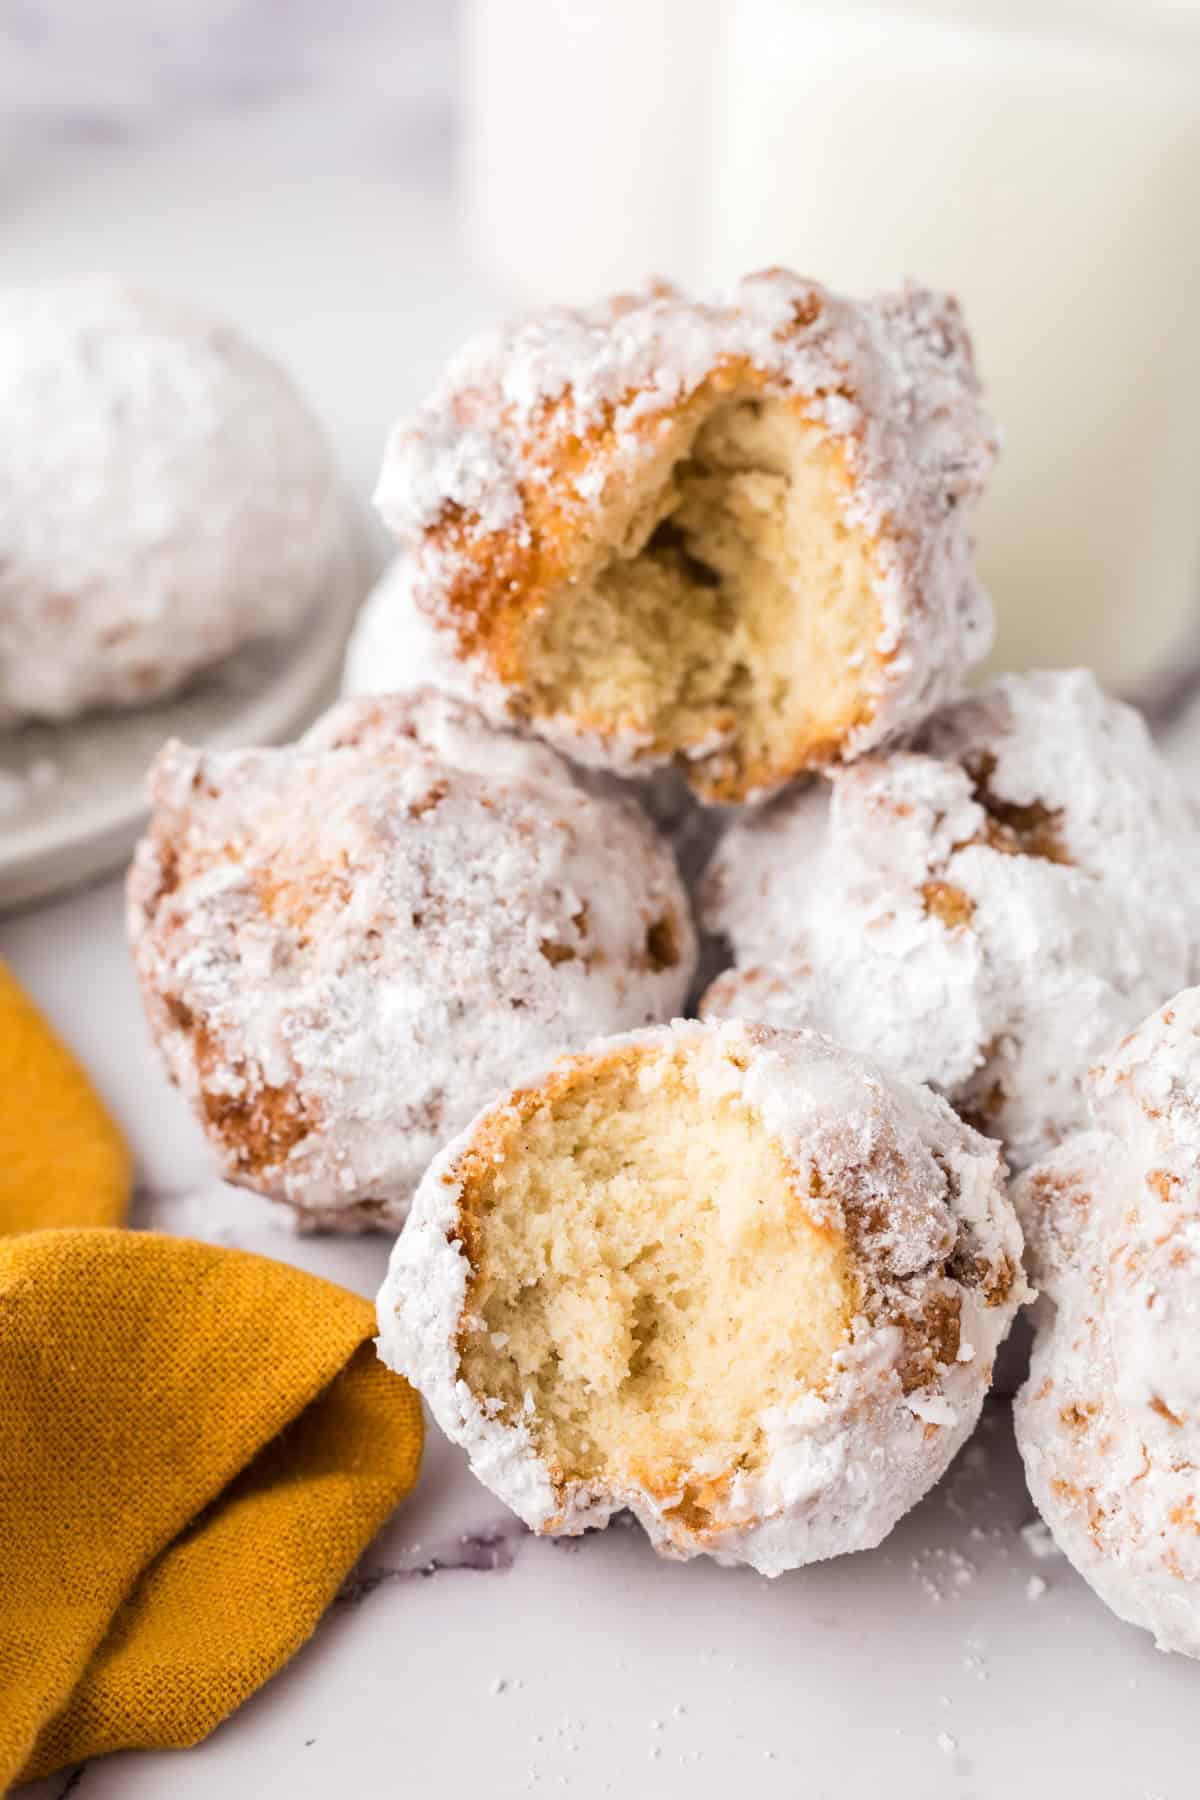 15 minute donut recipe balls dusted with powdered sugar.